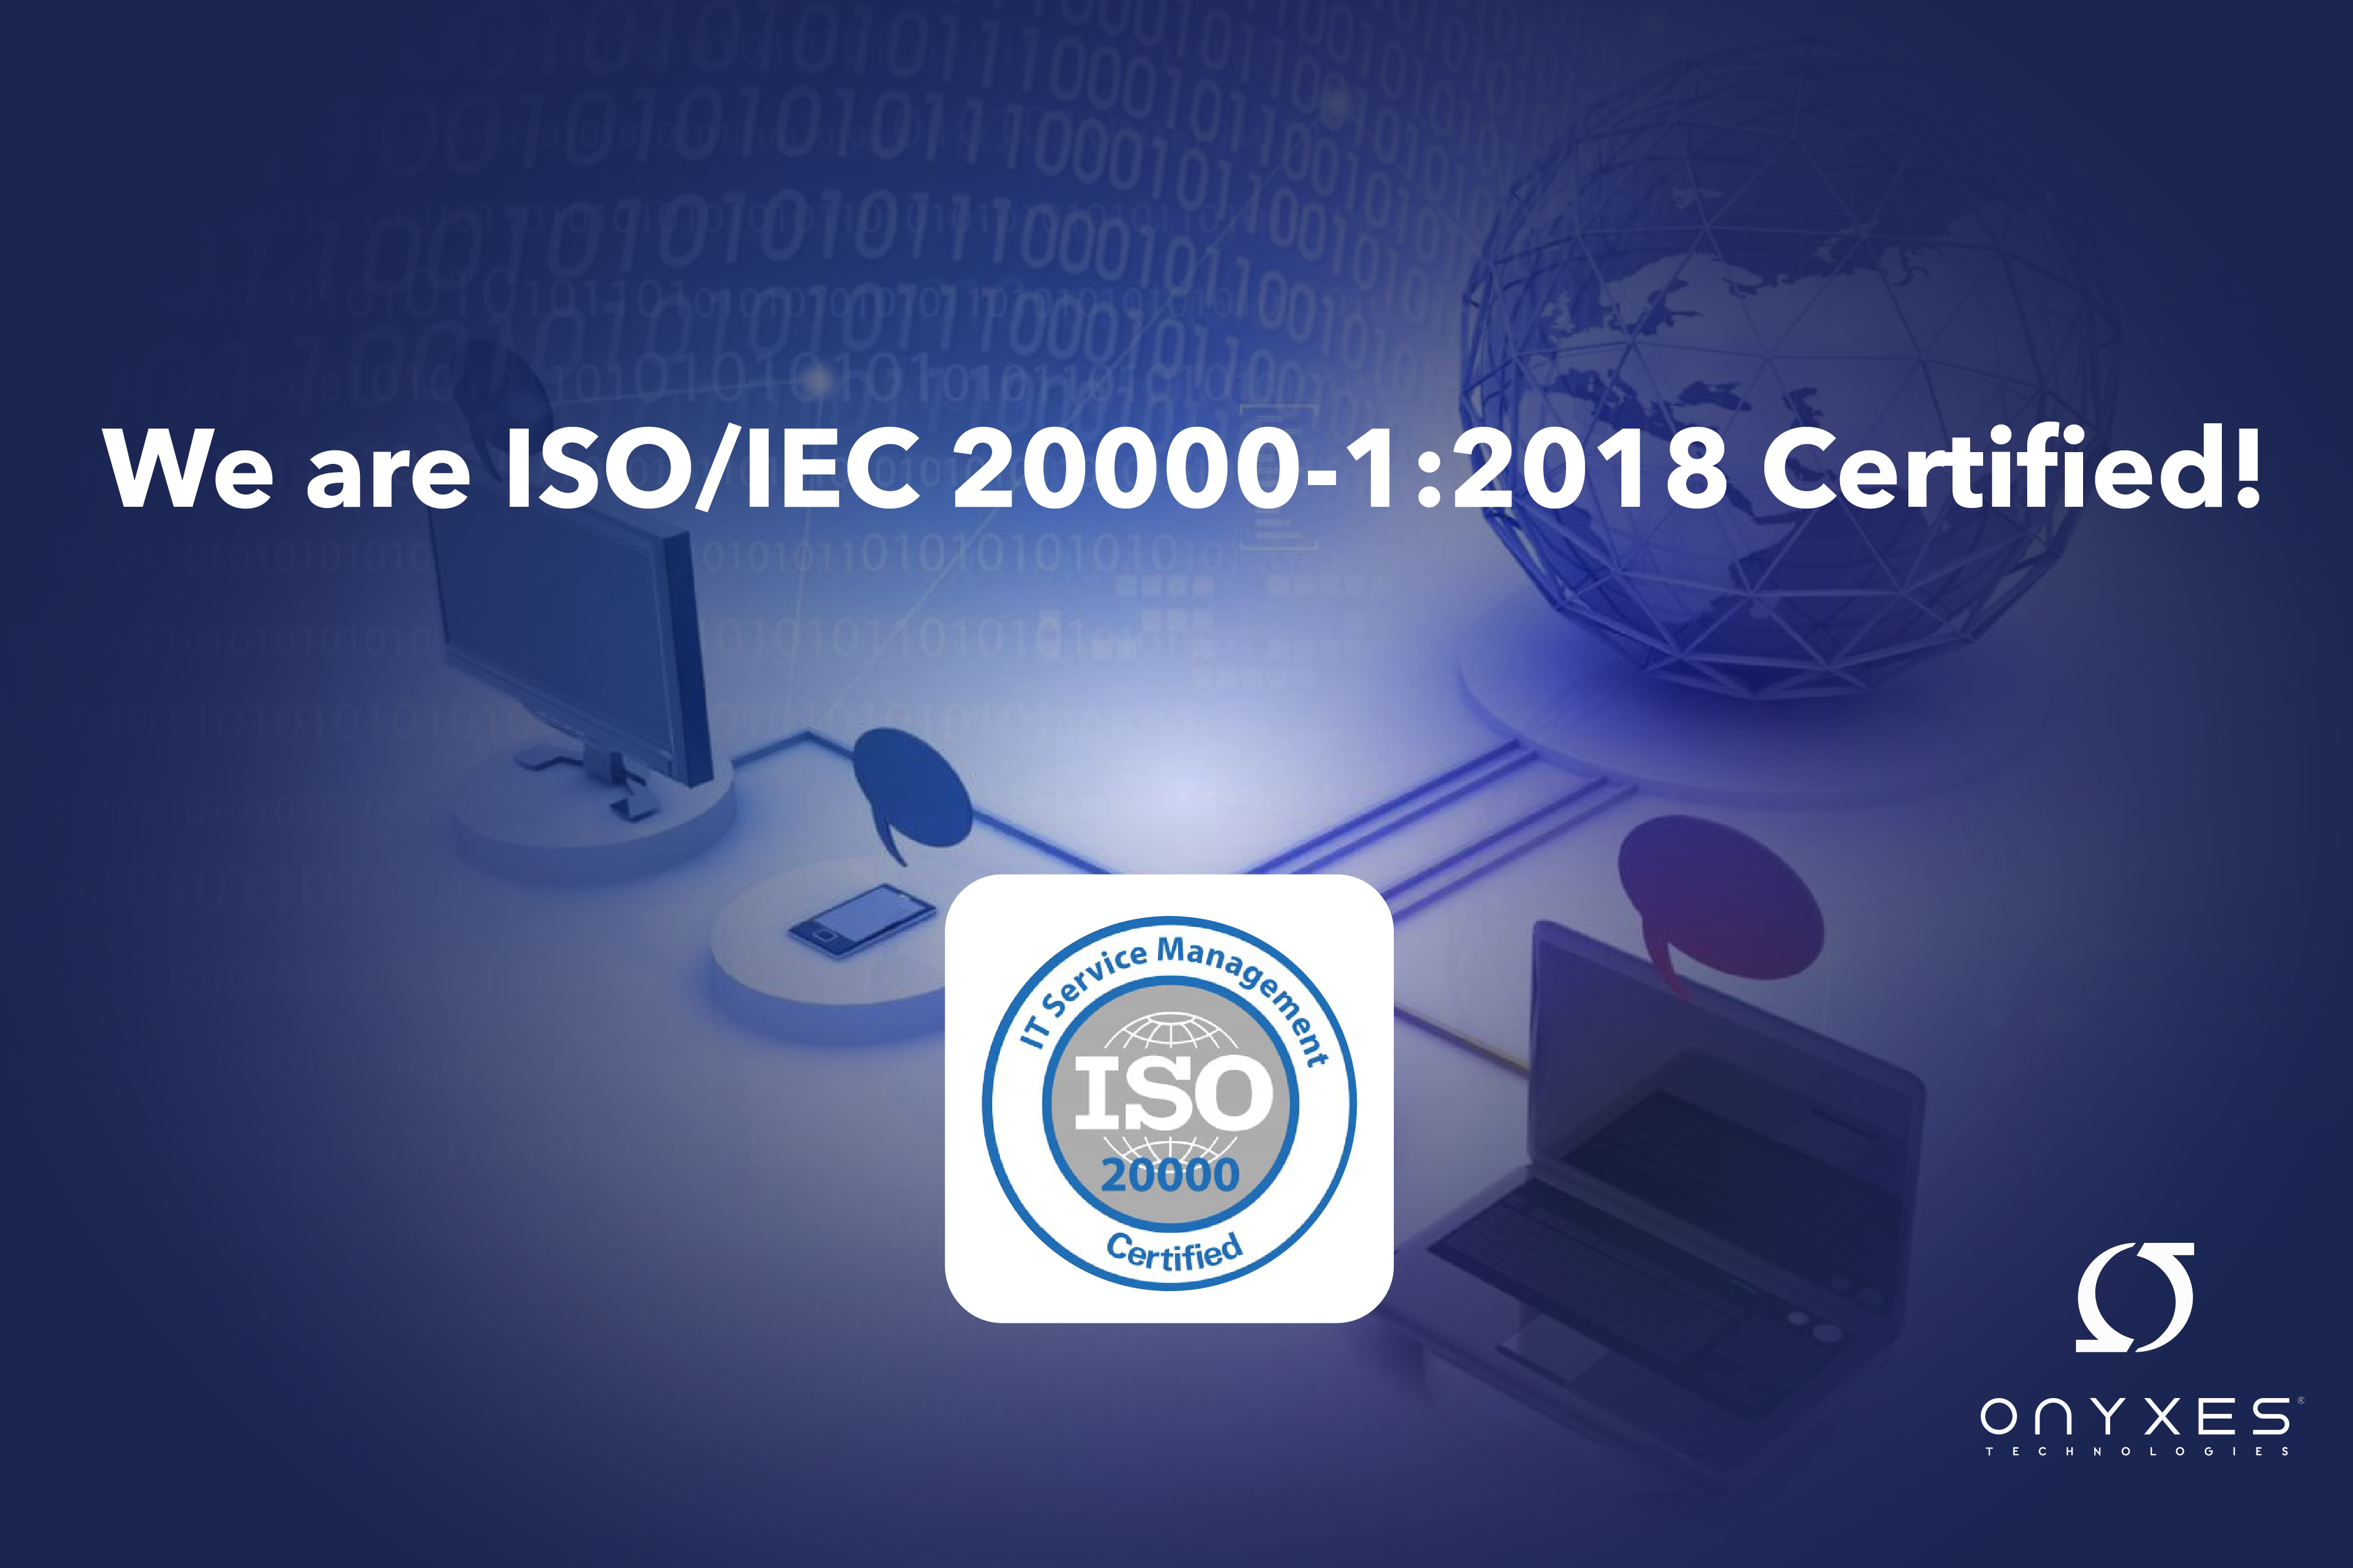 We are ISO/IEC 20000-1 :2018 certified !